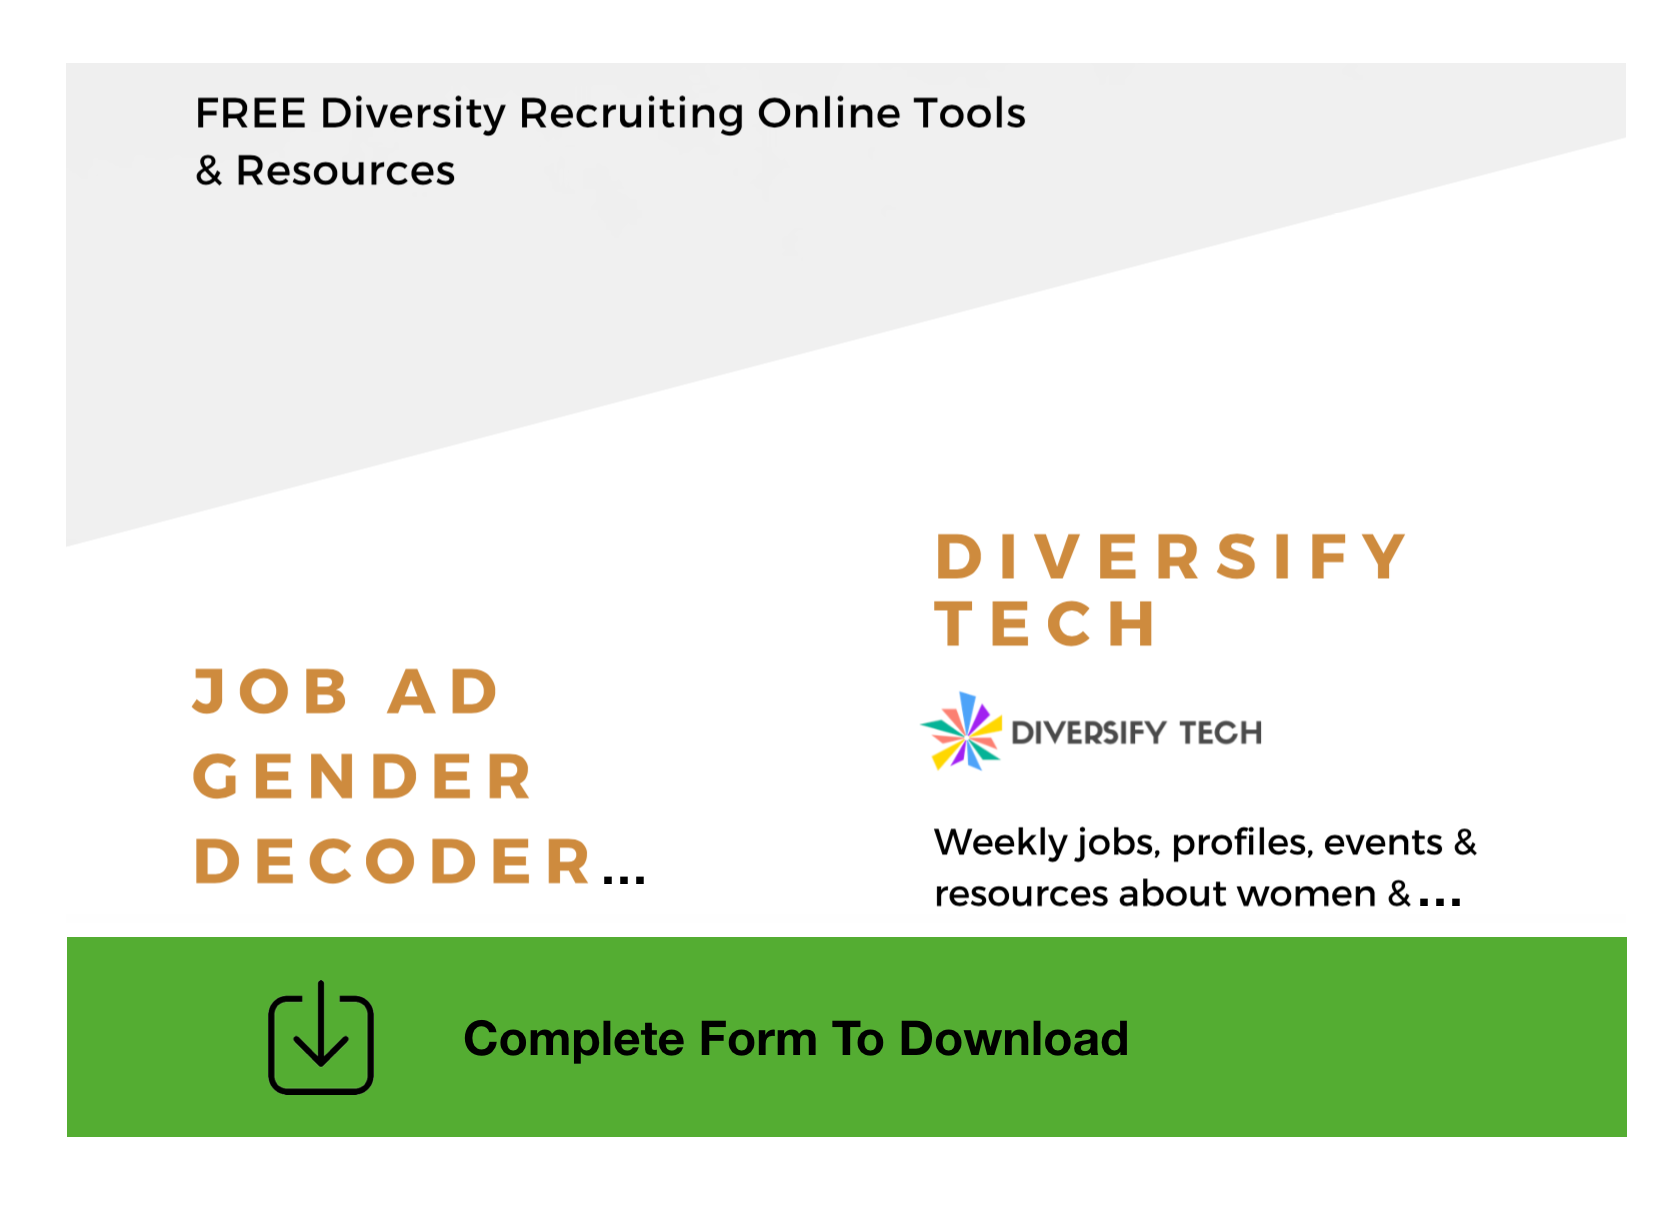 [INFOGRAPHIC]: FREE Diversity Recruiting Online Tools & Resources